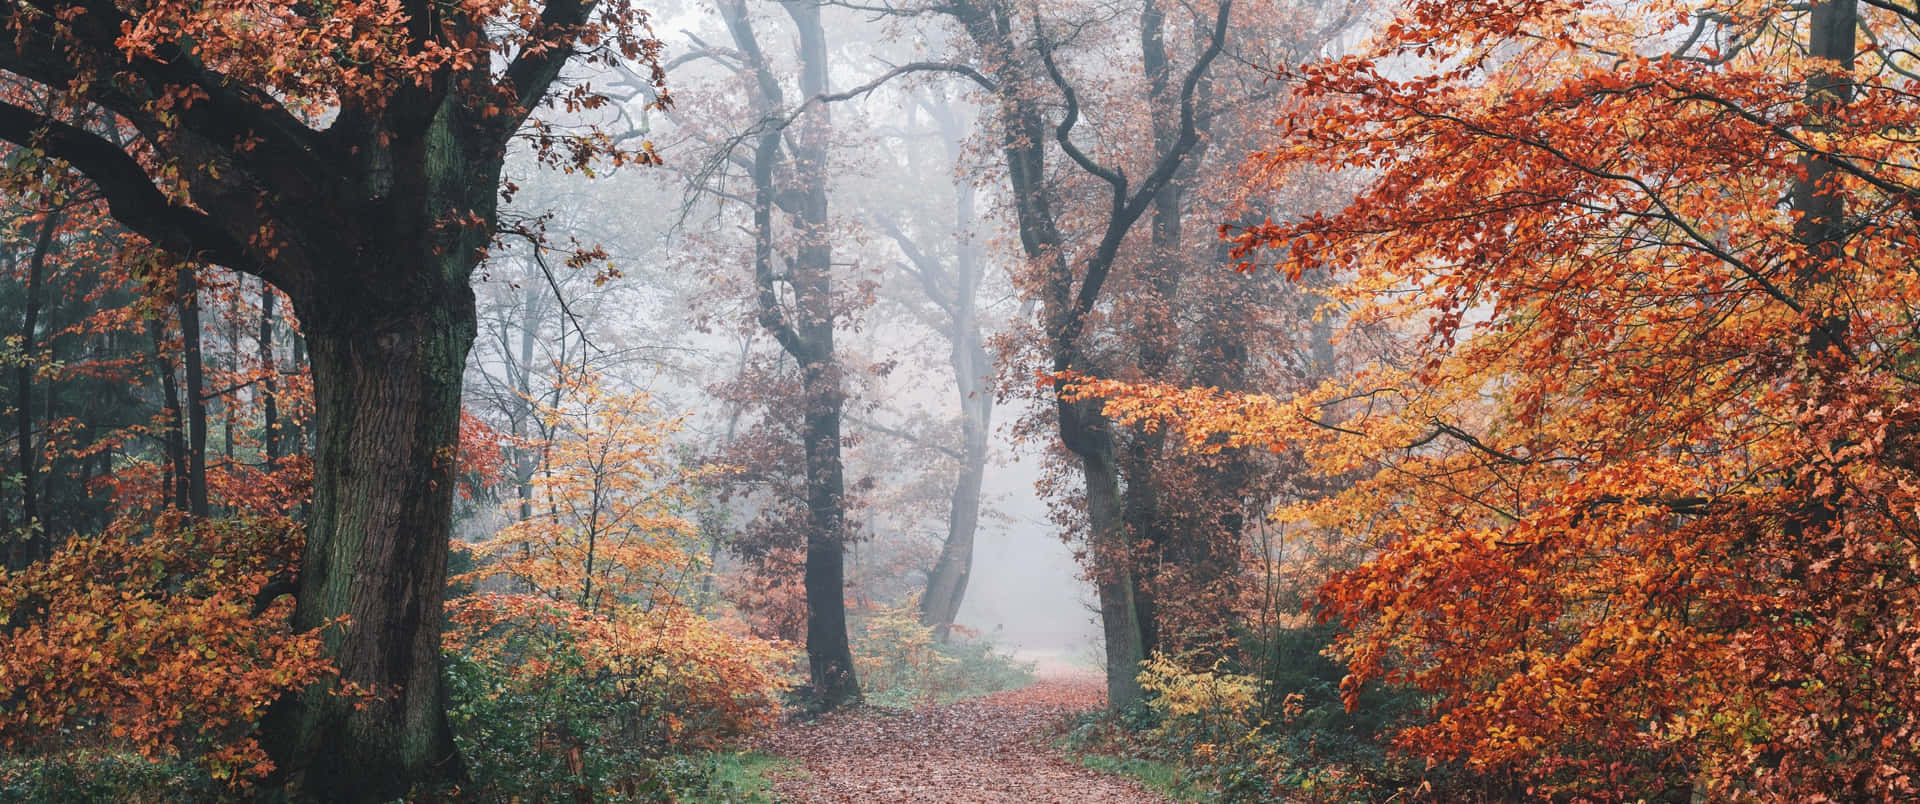 A Path Through A Forest With Autumn Leaves Wallpaper